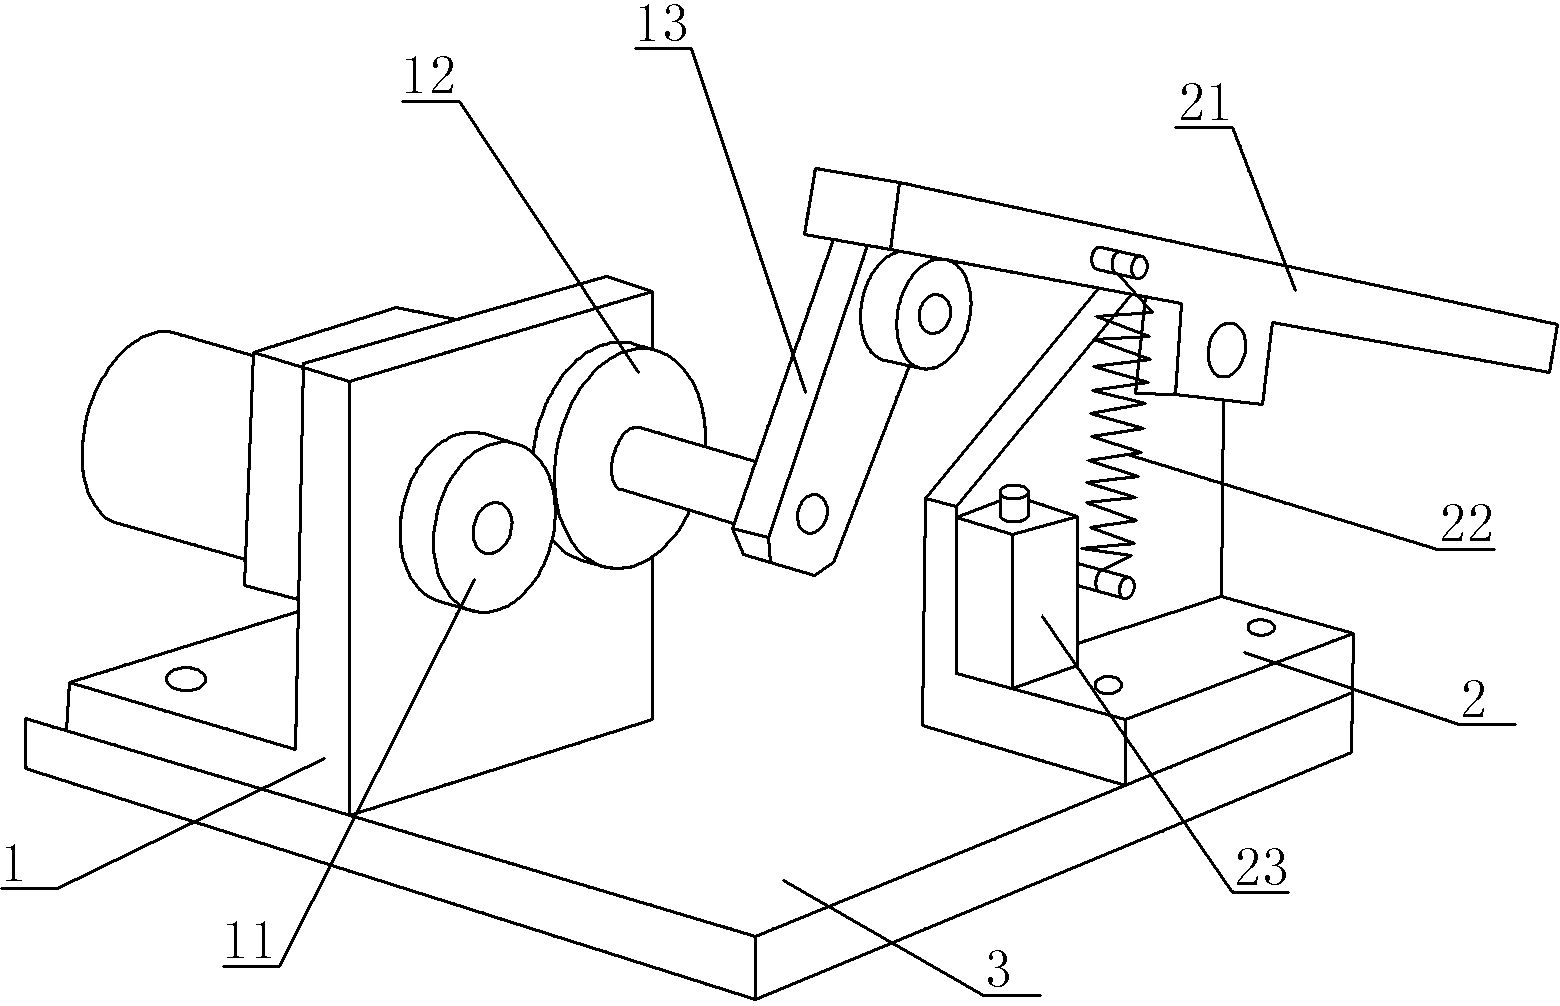 Swing device capable of automatically resetting